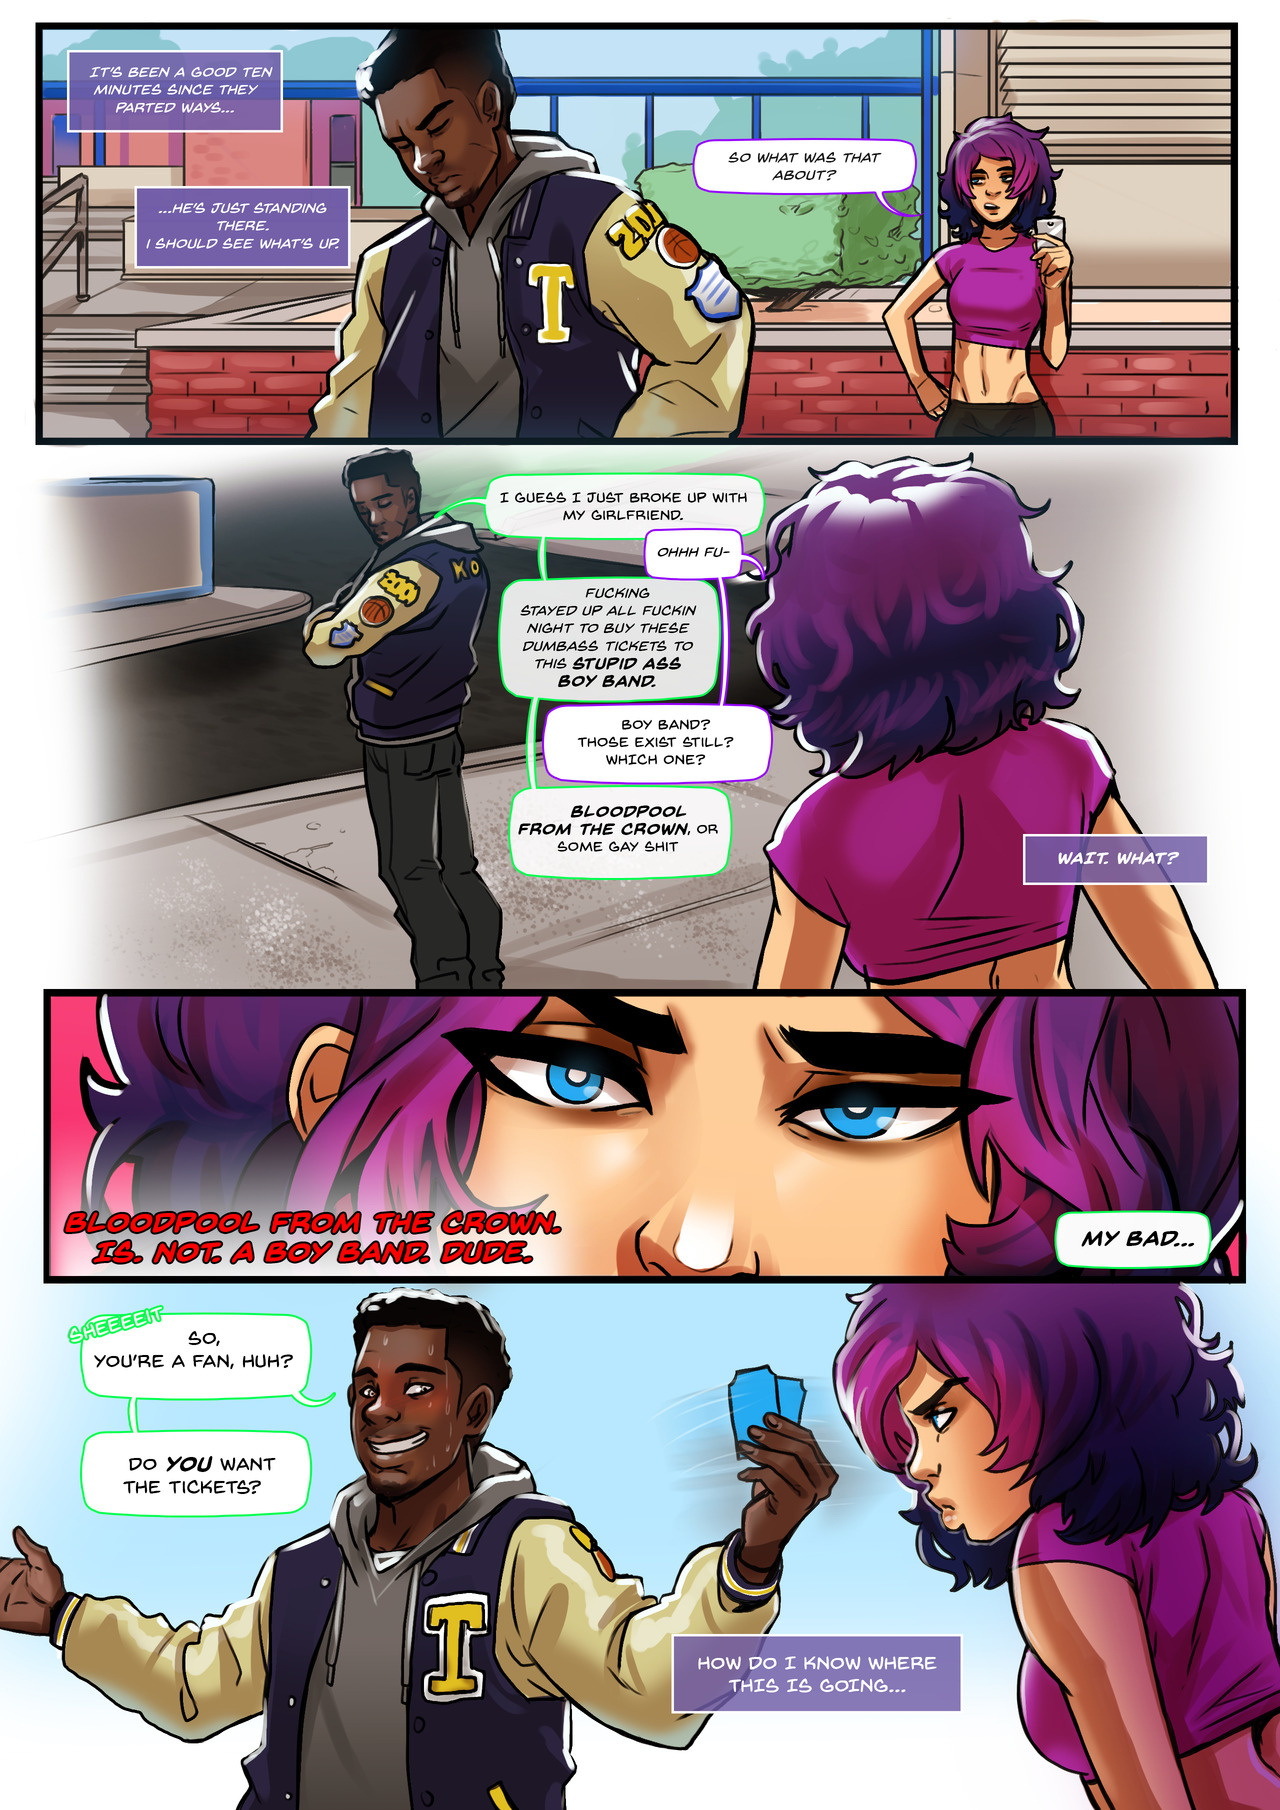 The Backdoor Pass - Page 2